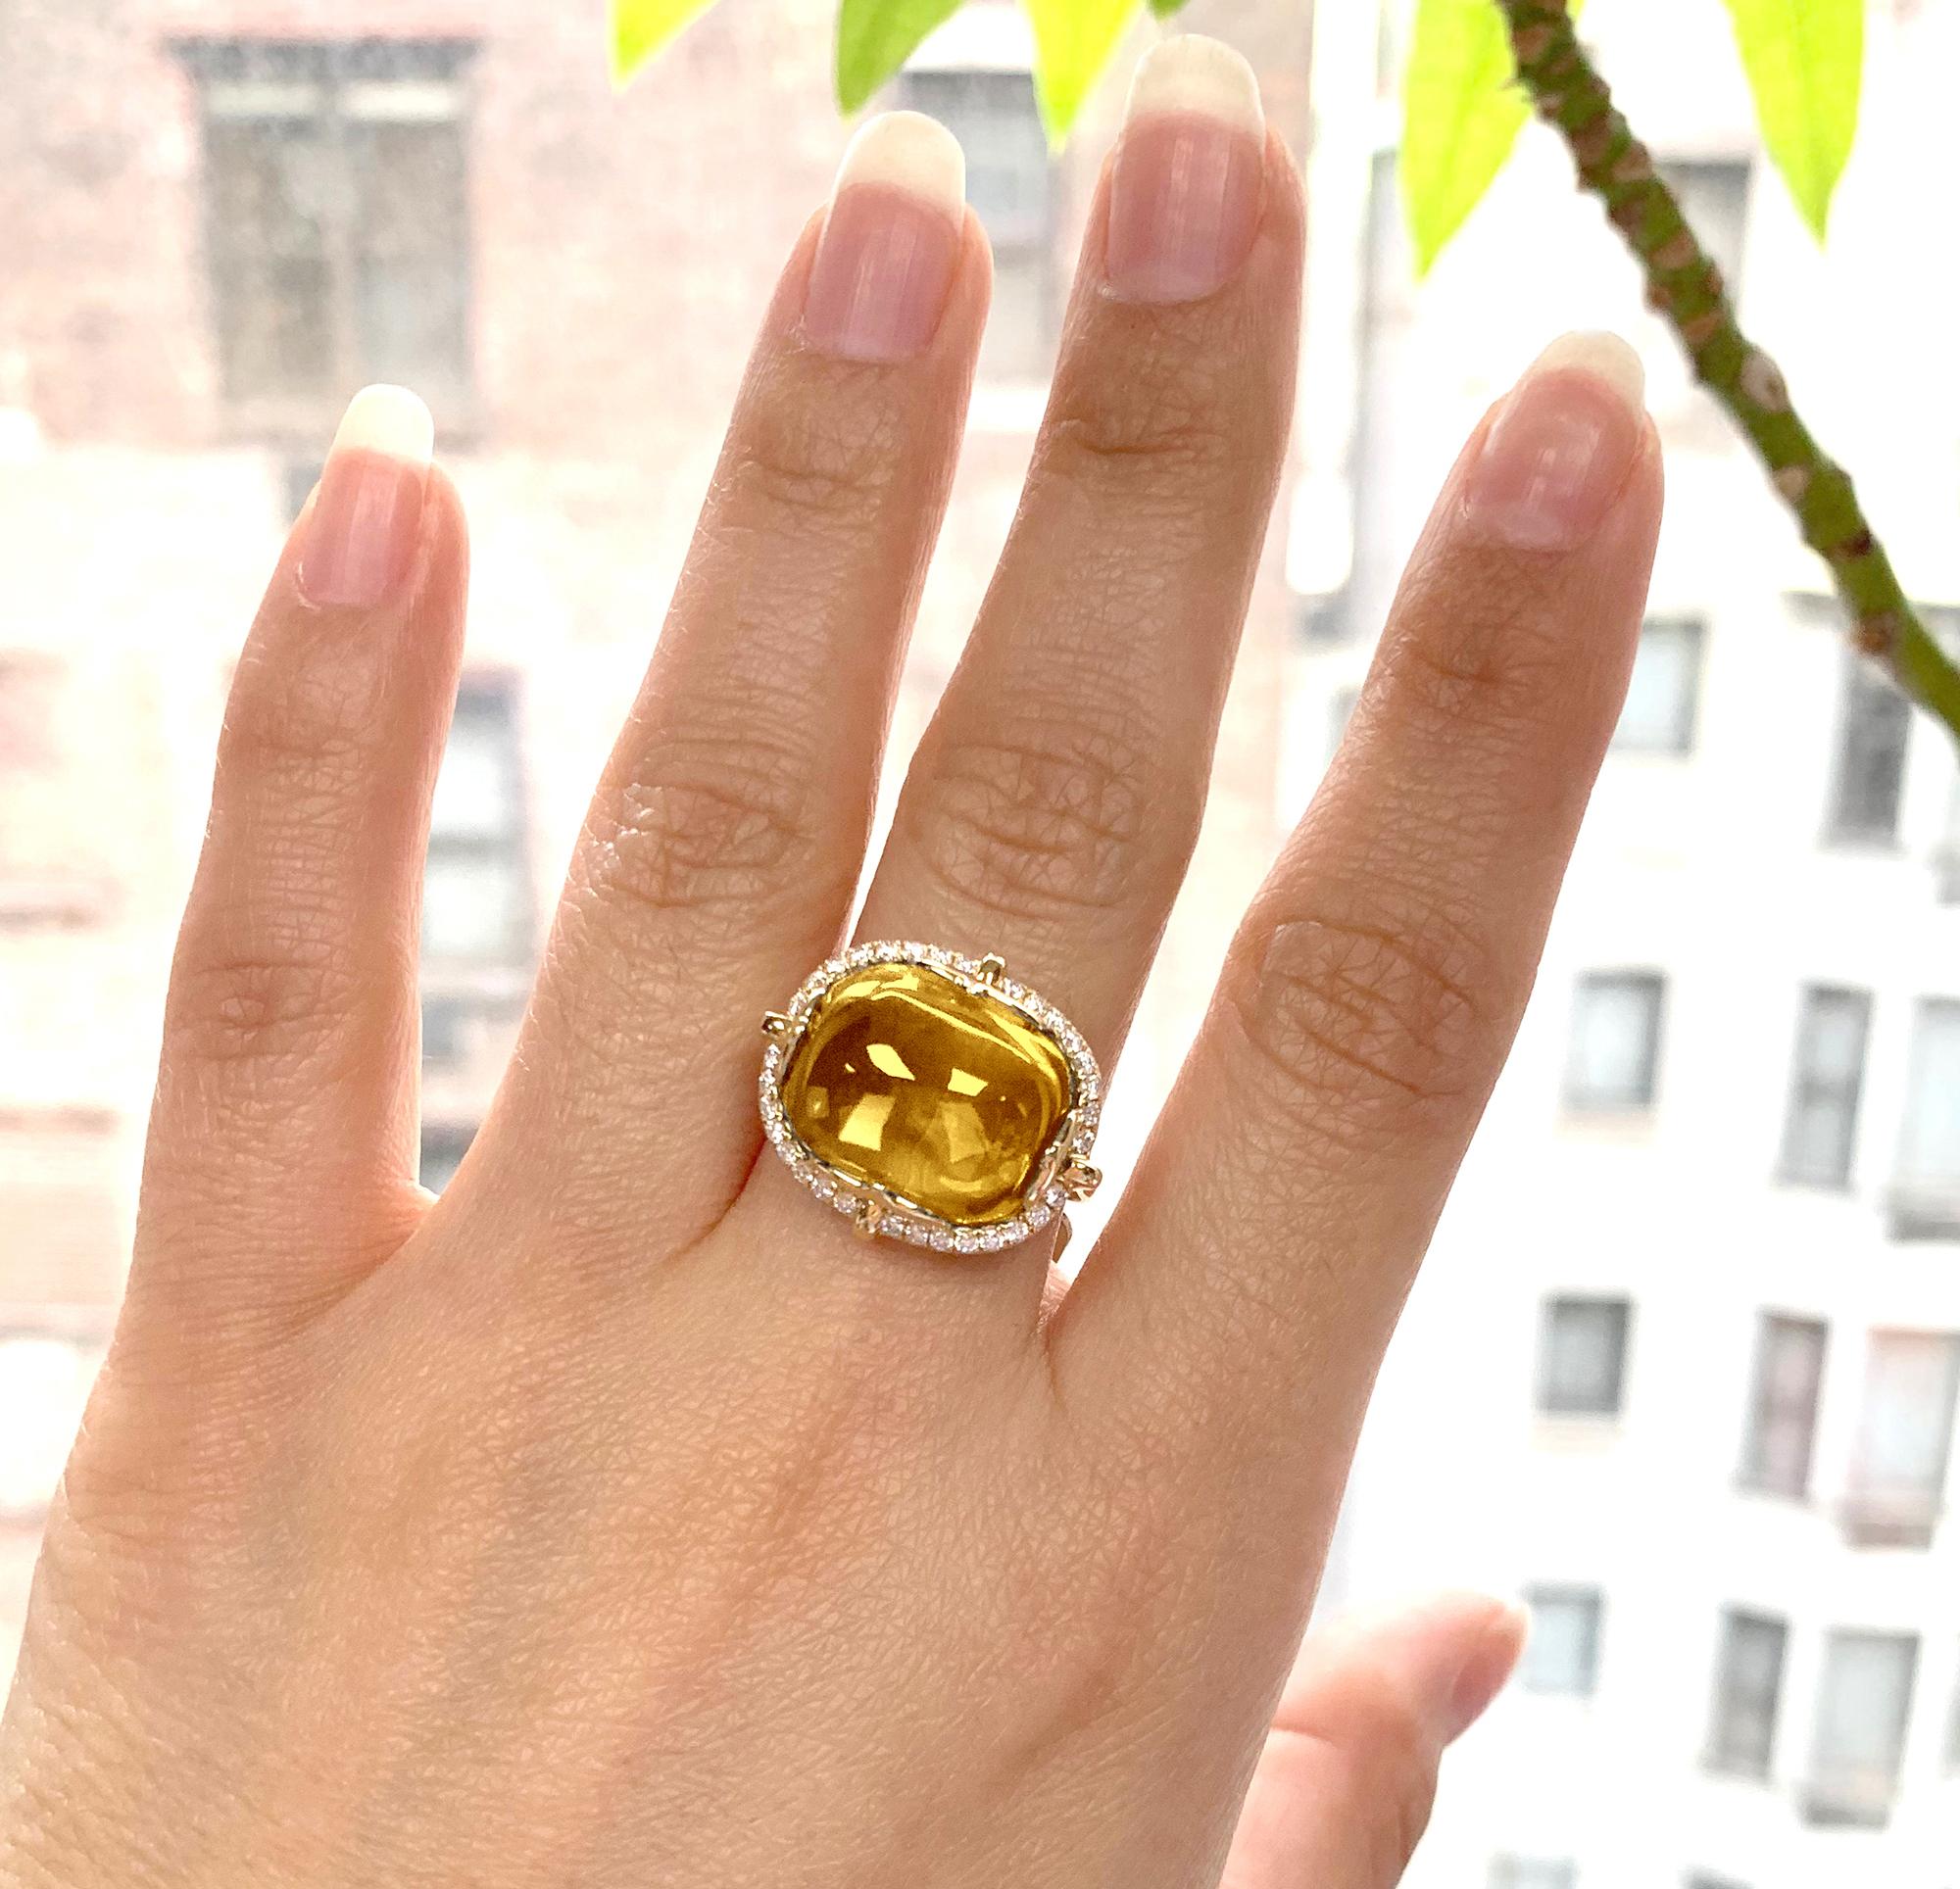 Citrine Cushion Cabochon Ring in 18K Yellow Gold with Diamonds, from 'Rock 'N Roll' Collection

Stone Size: 16 x 13 mm 

Diamonds: G-H / VS, Approx Wt: 0.34 Cts